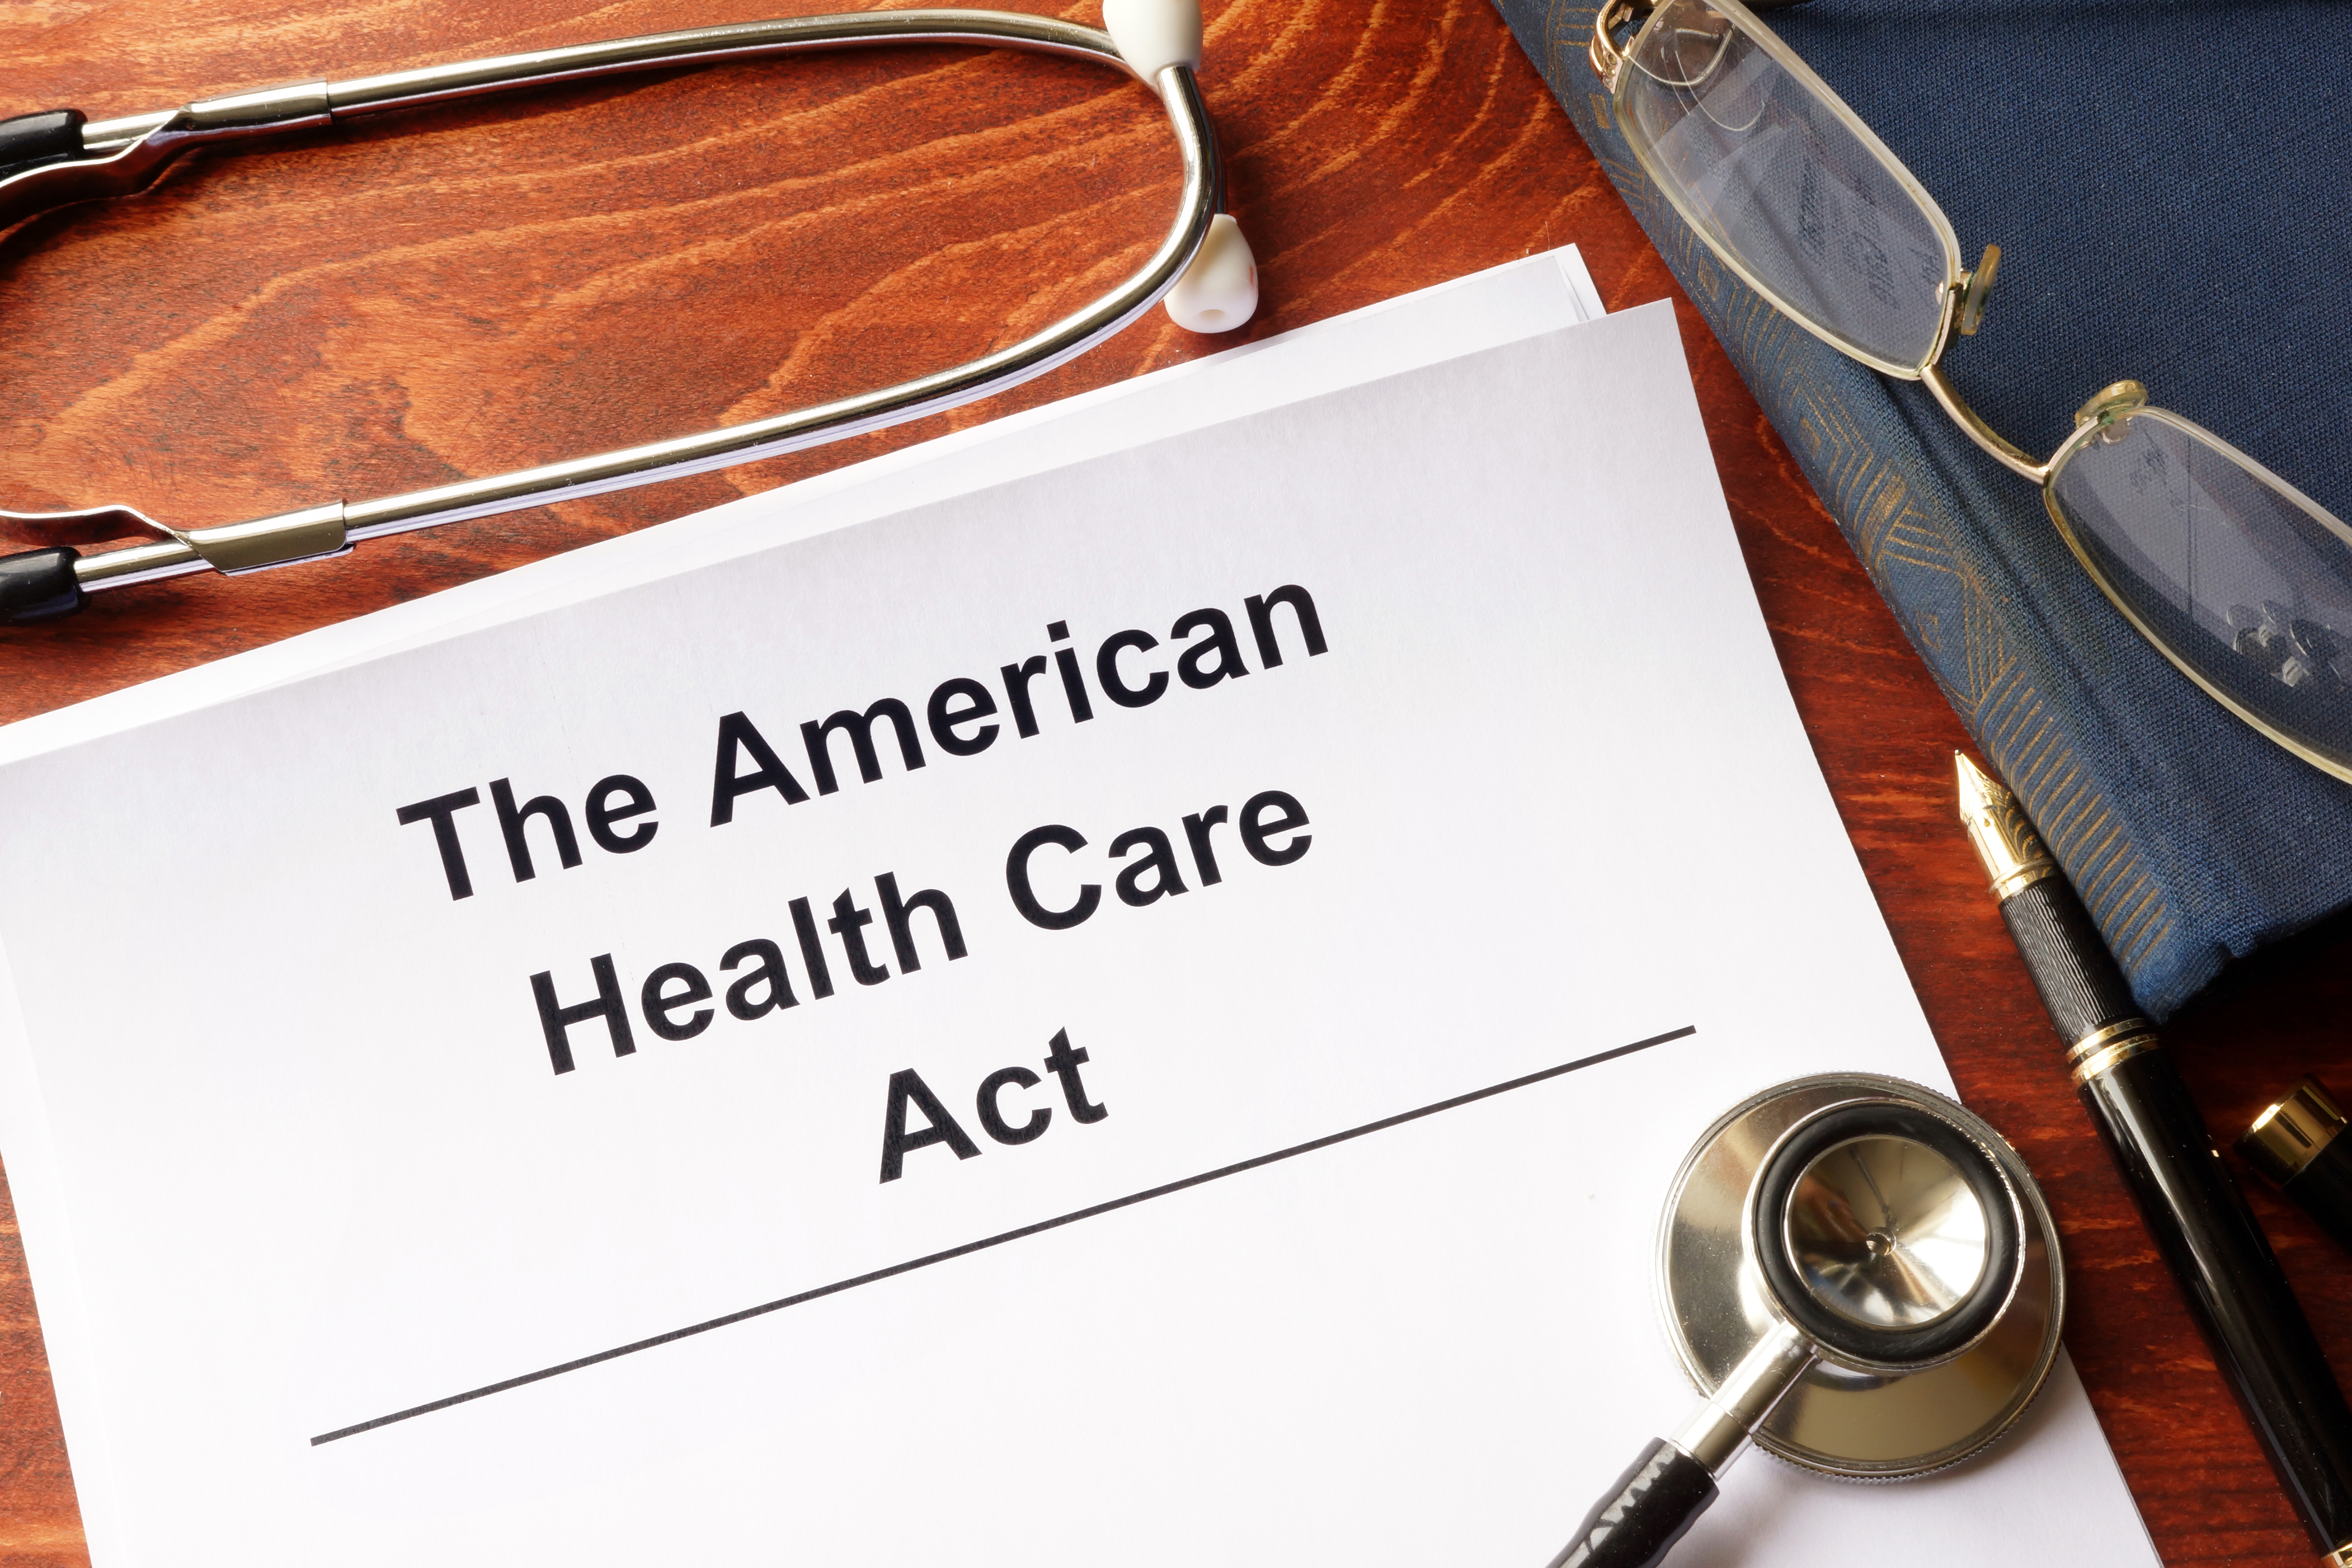 The American Health Care Act